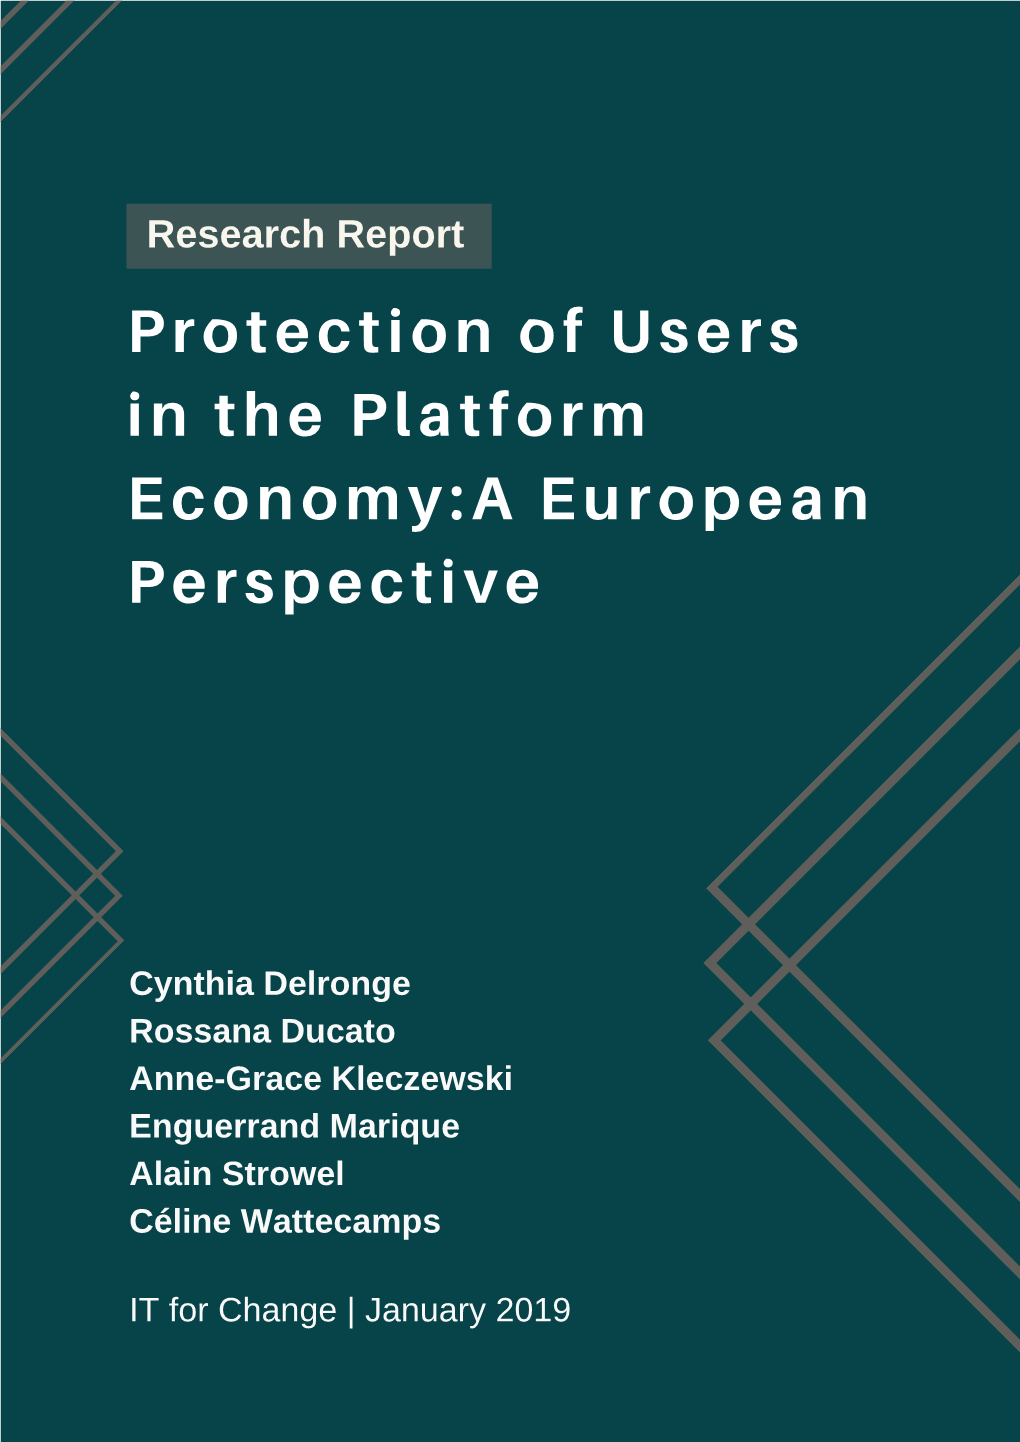 Protection of Users in the Platform Economy:A European Perspective